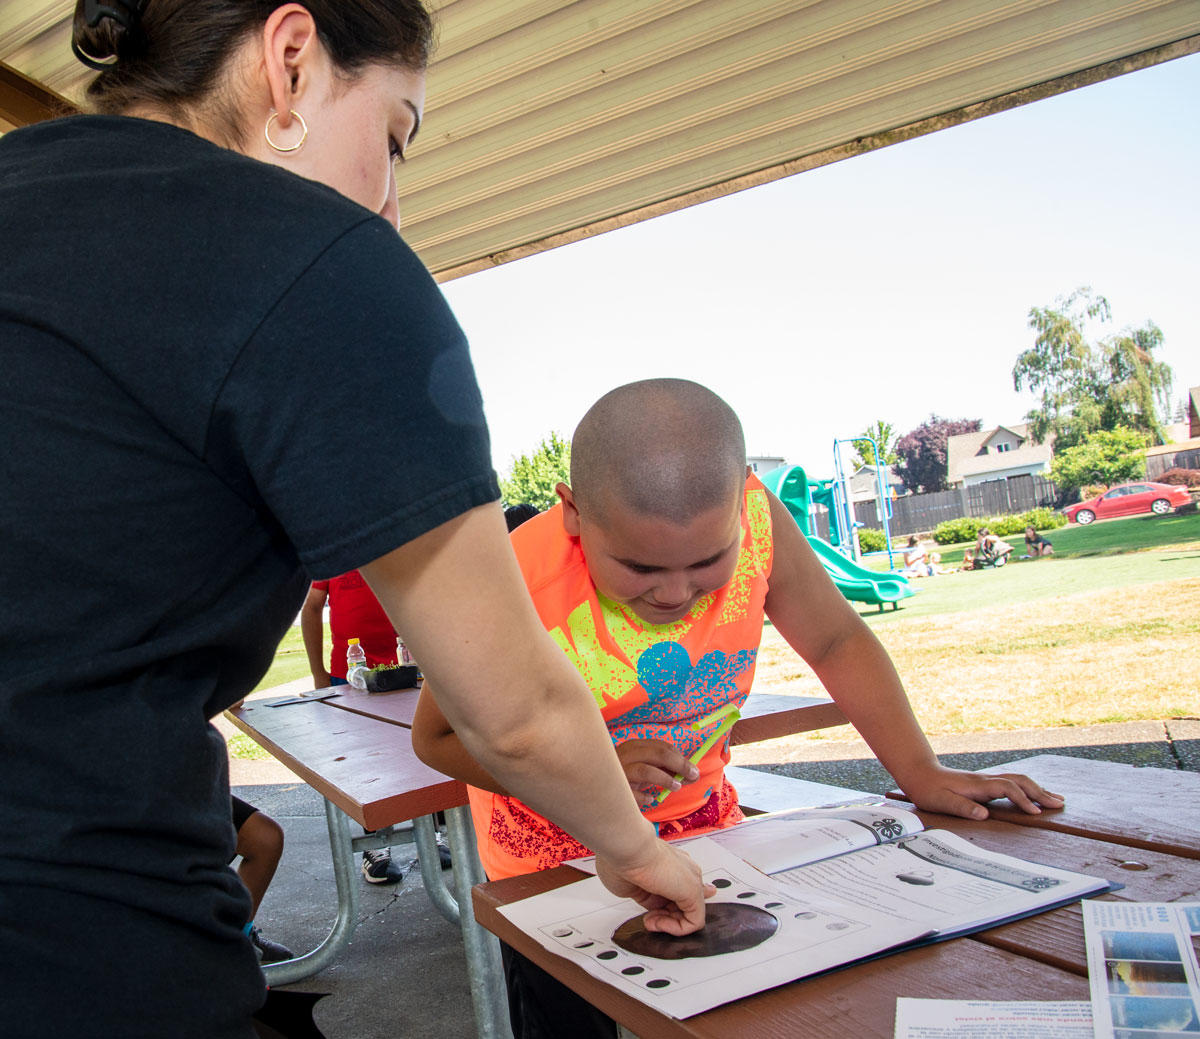 A woman in a black T-shirt points and a boy in a tie-dye T-shirt look at a piece of paper on a picinic table in a park.